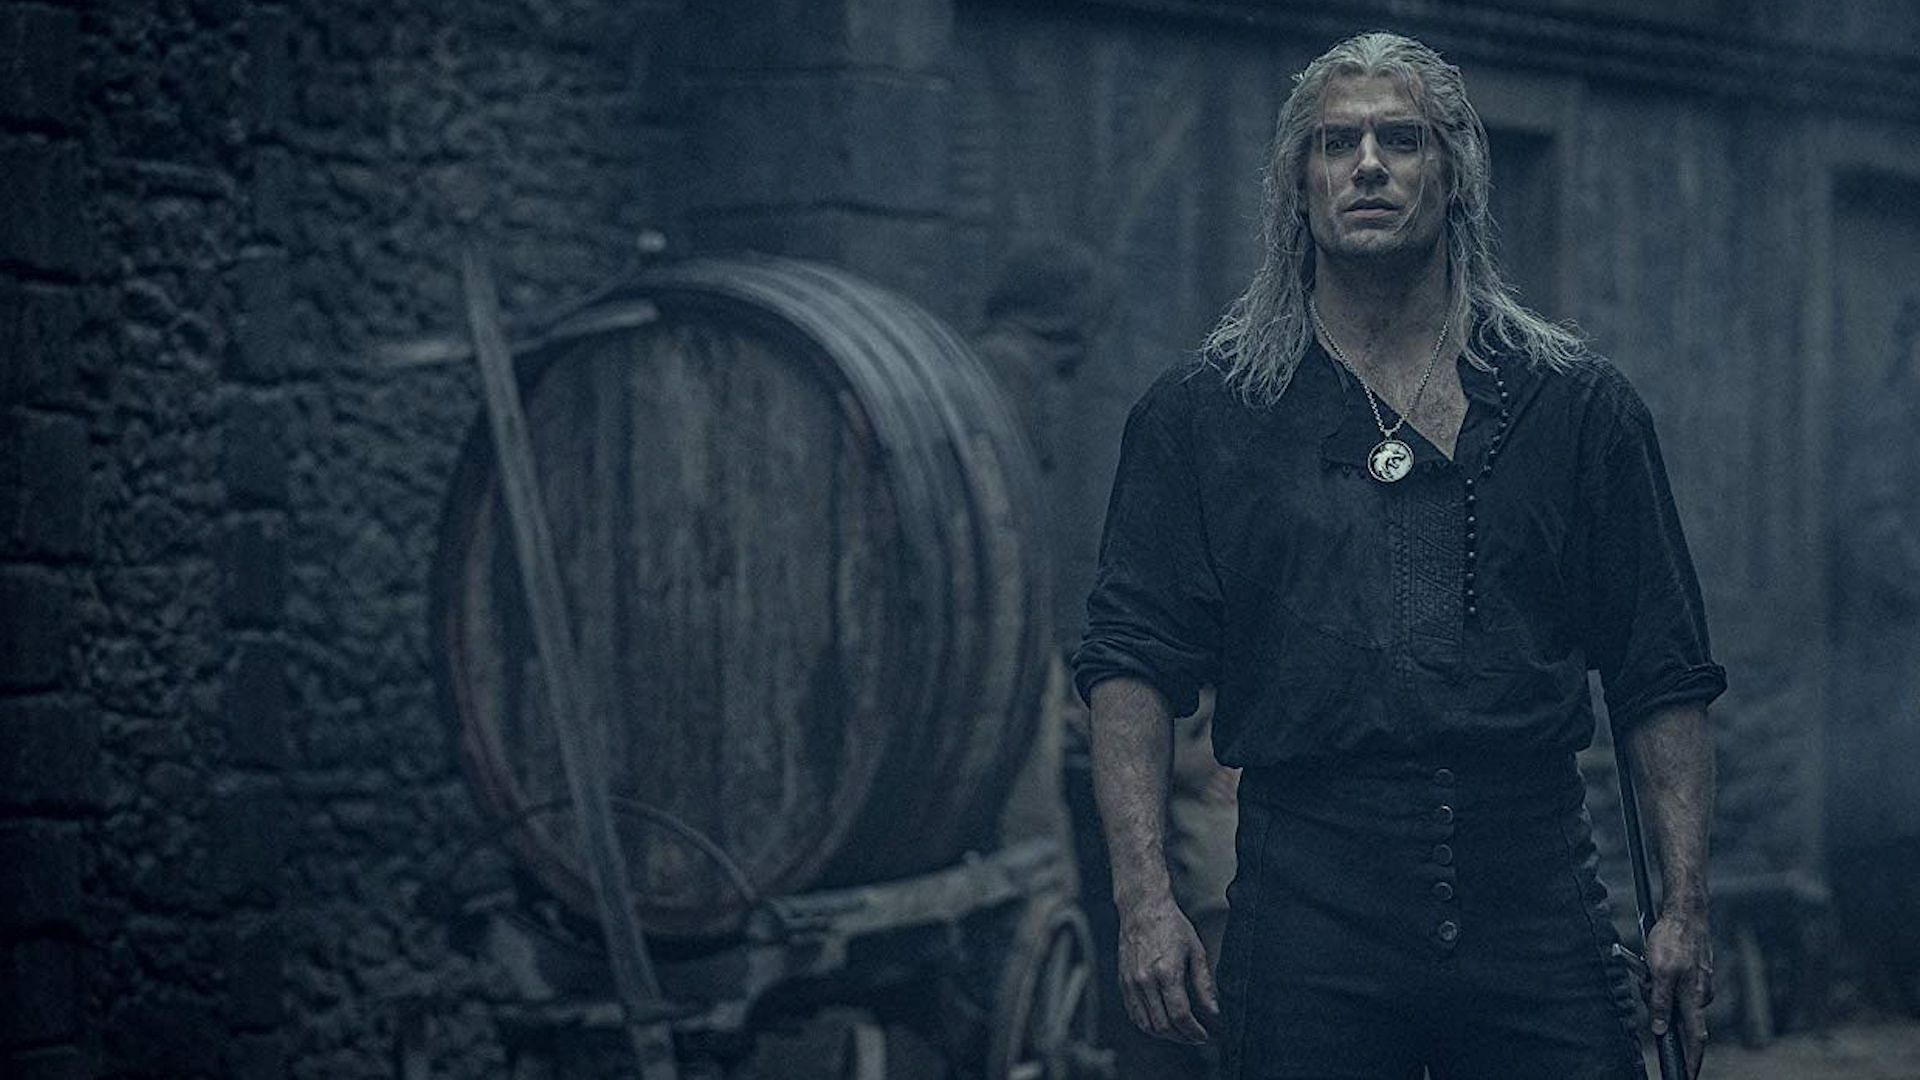 A still from The Witcher (Image via IMDB)